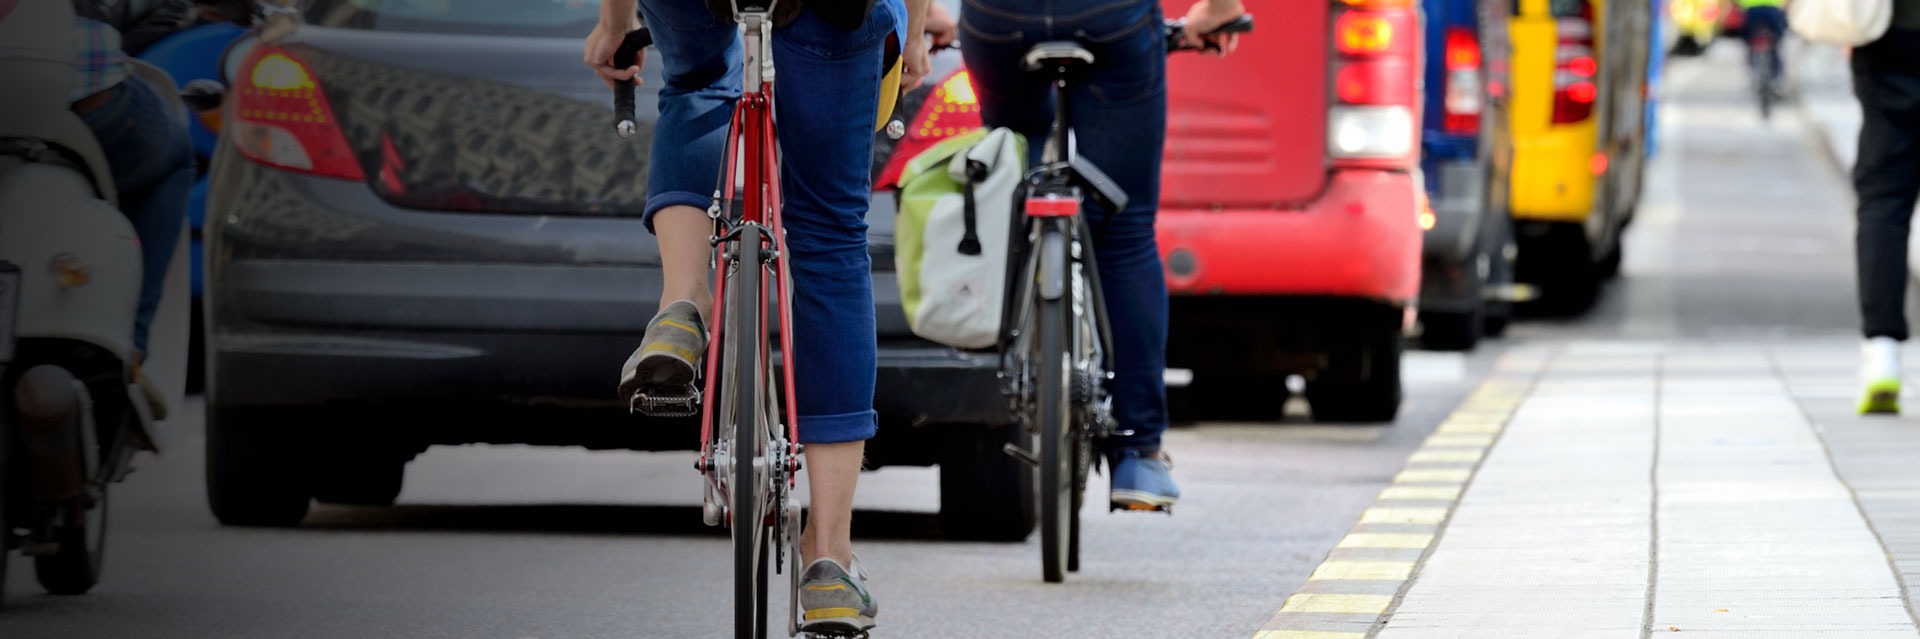 DFT £338 million package to further fuel active travel boom